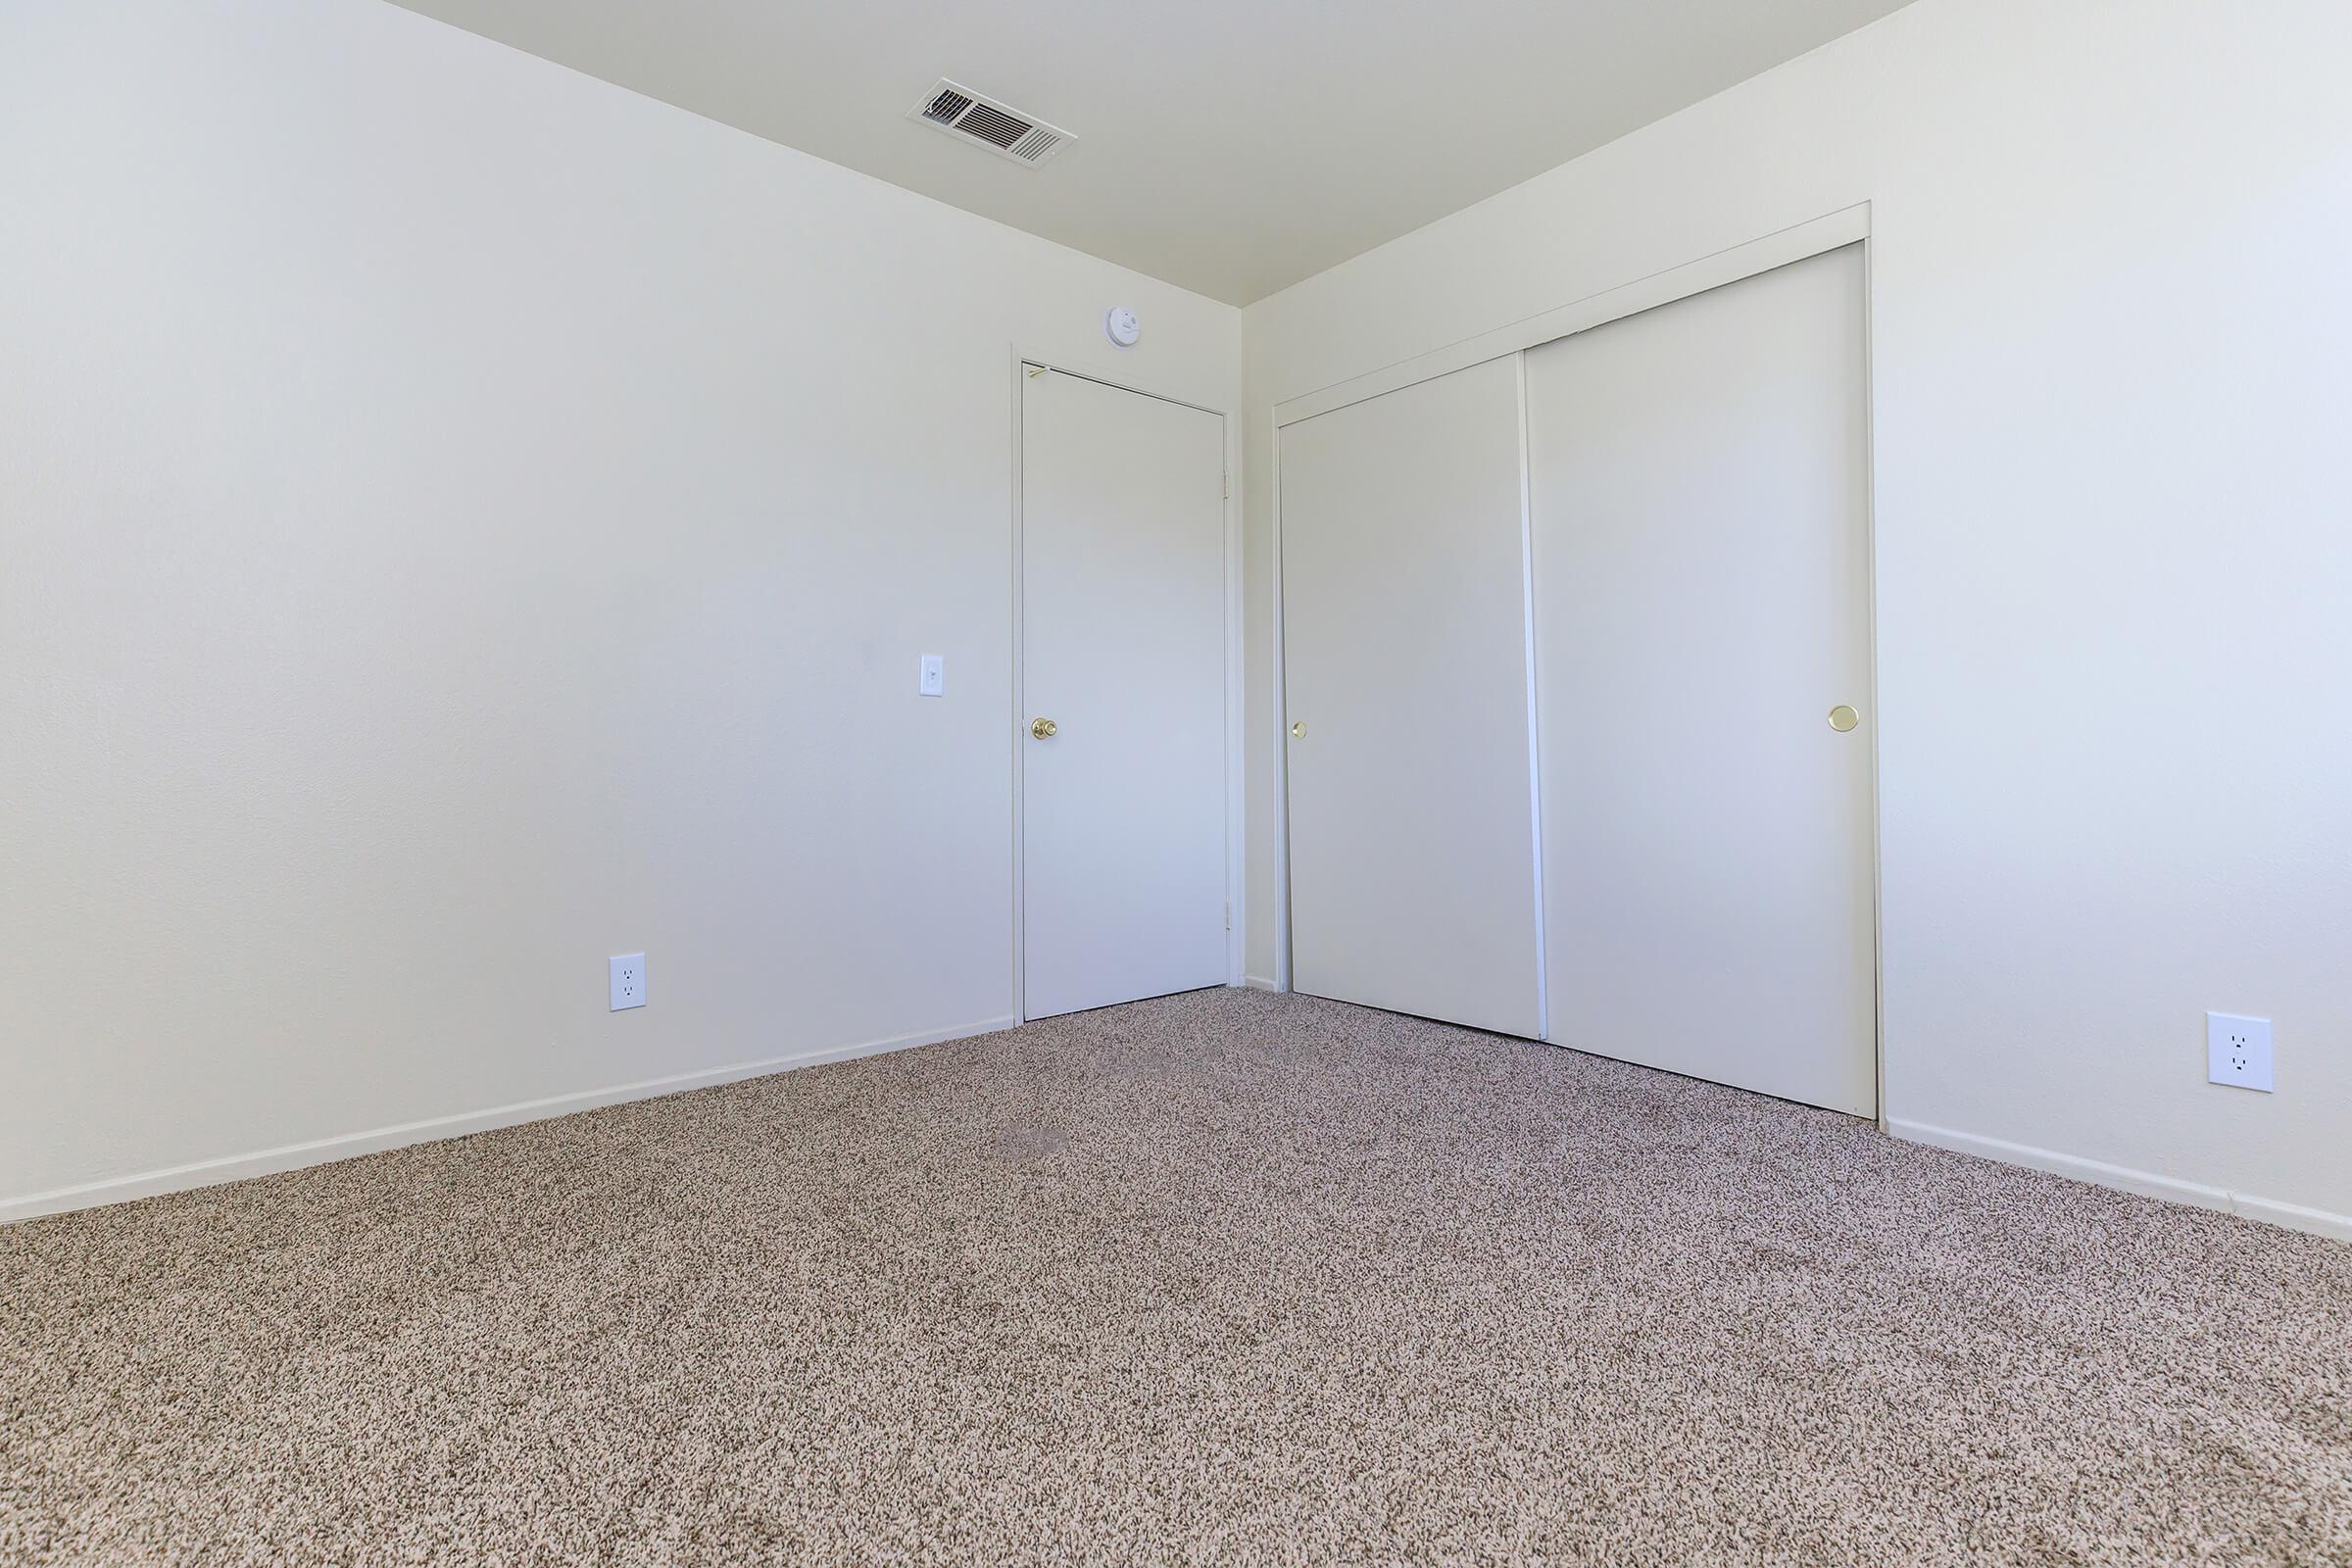 Vacant bedroom with carpet and sliding closet doors